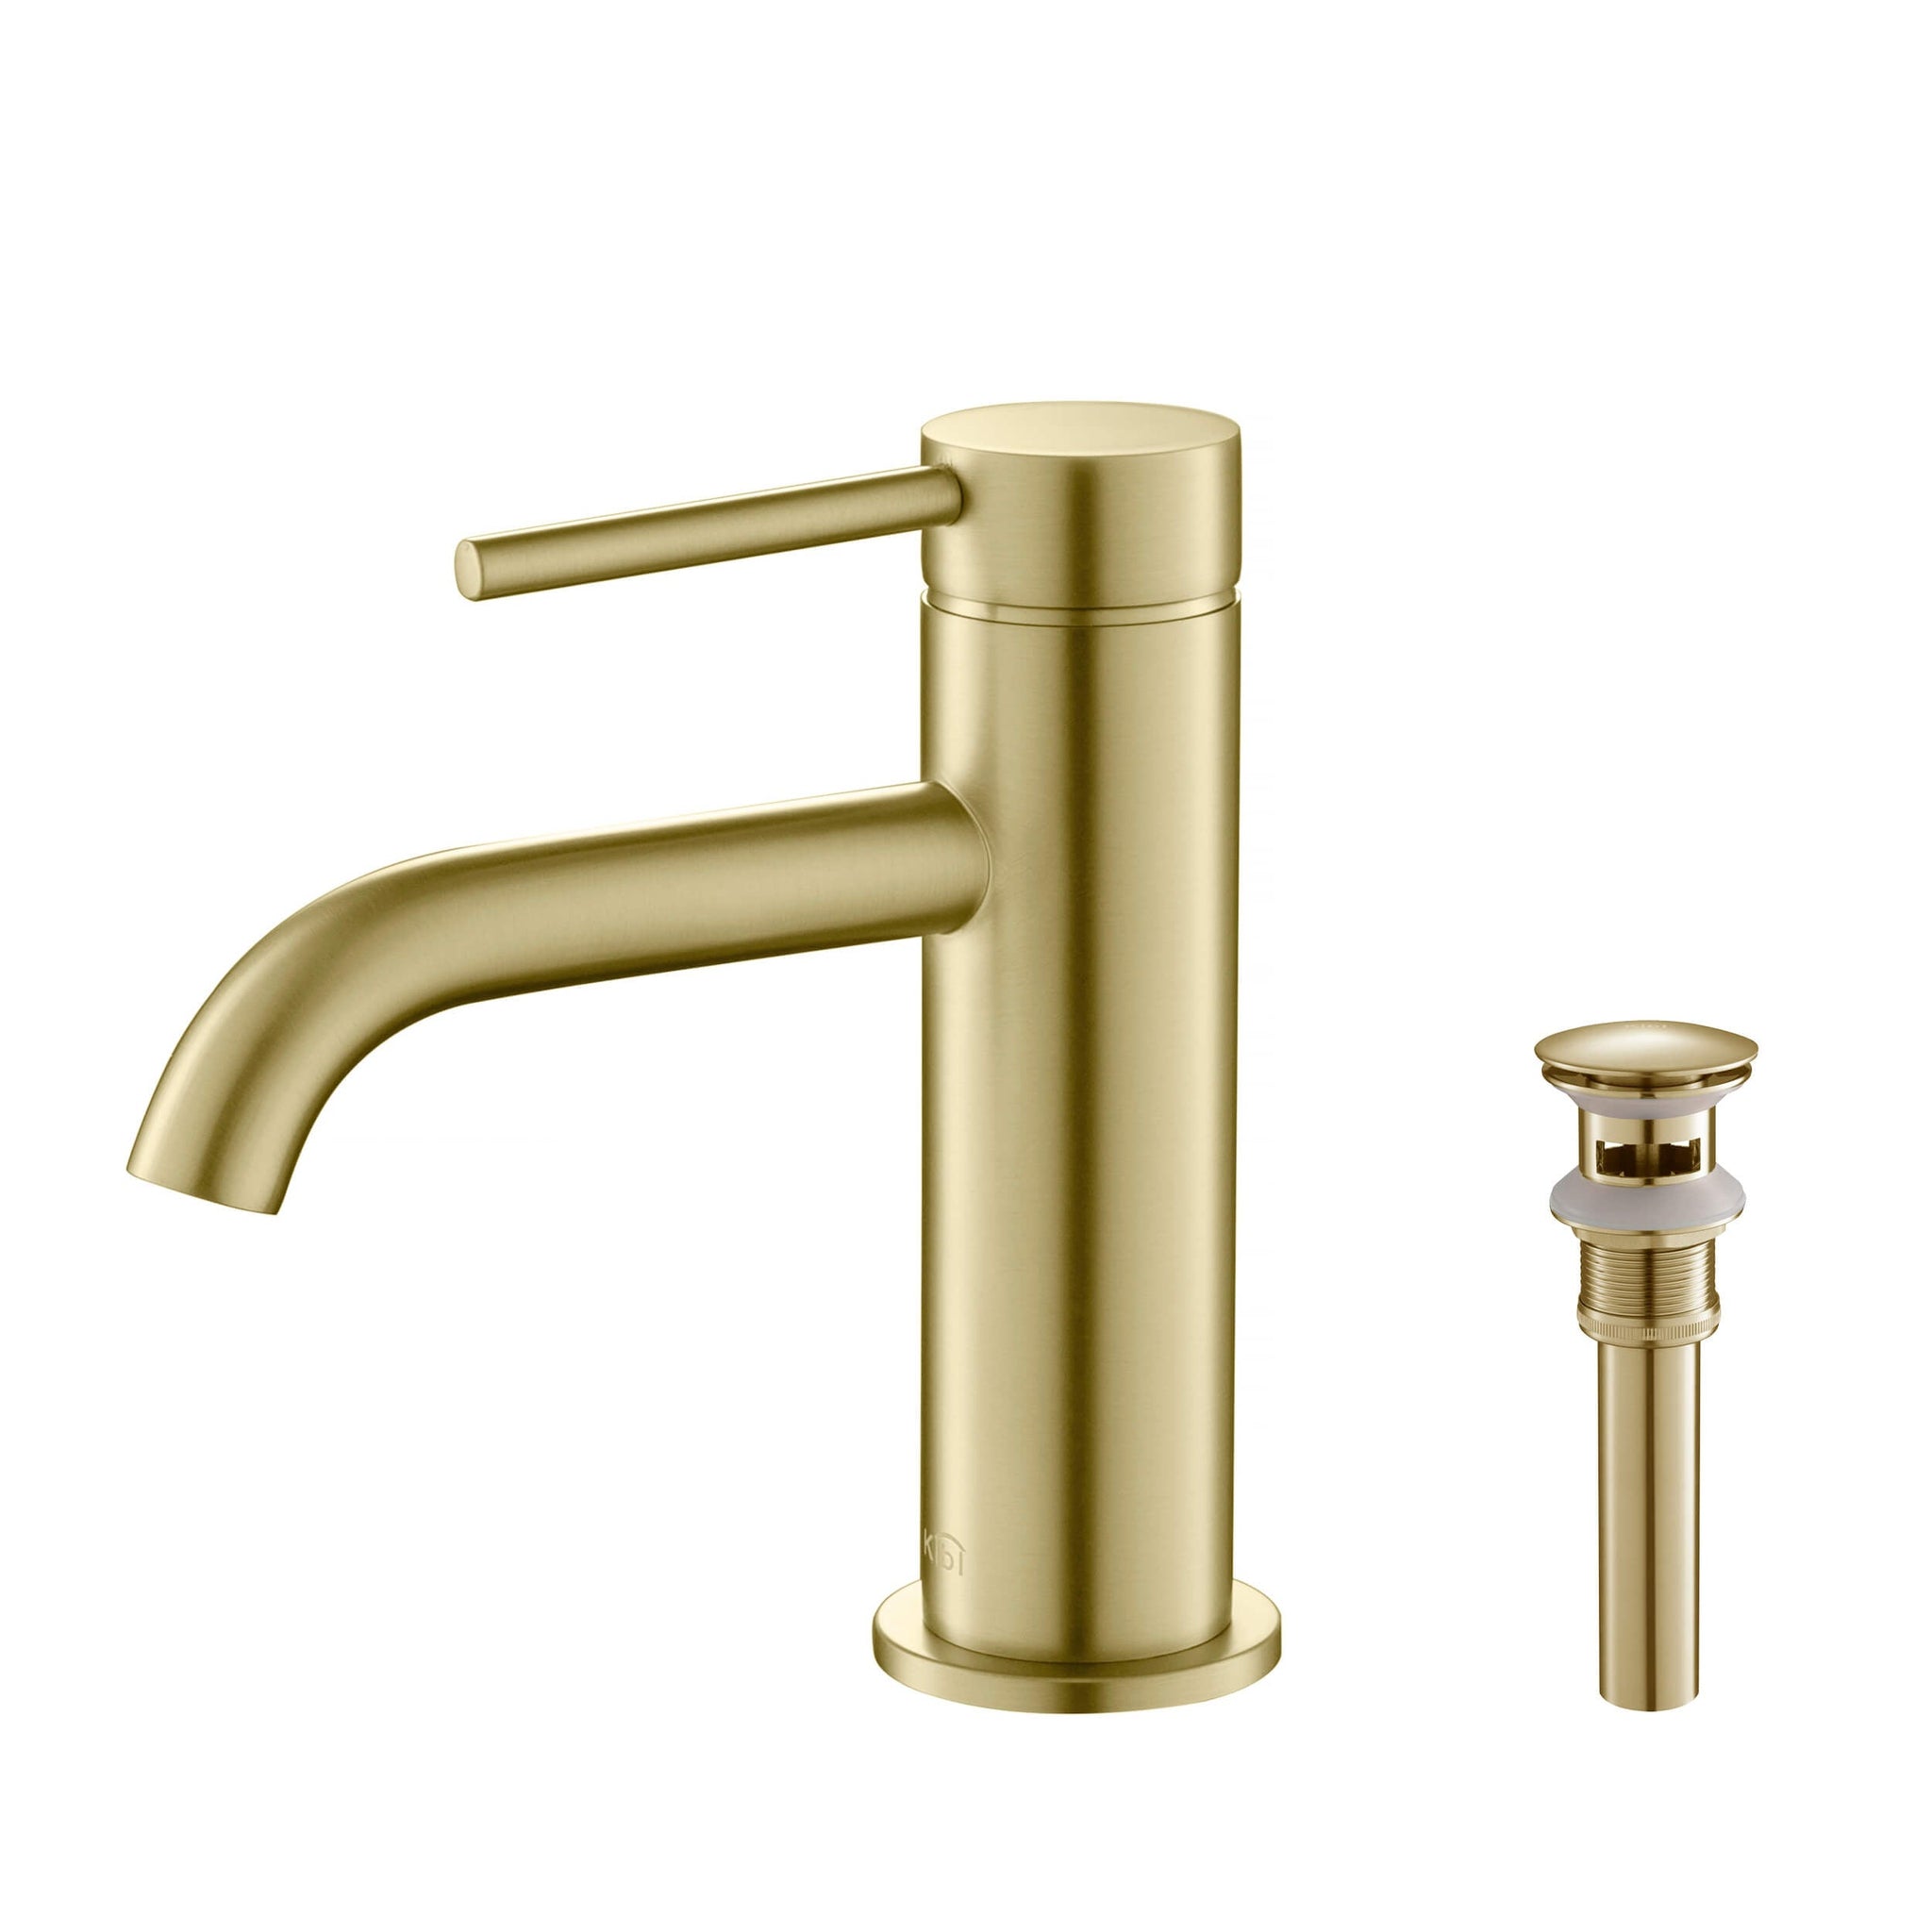 KIBI, KIBI Circular Single Handle Brushed Gold Solid Brass Bathroom Sink Faucet With Pop-Up Drain Stopper Small Cover With Overflow